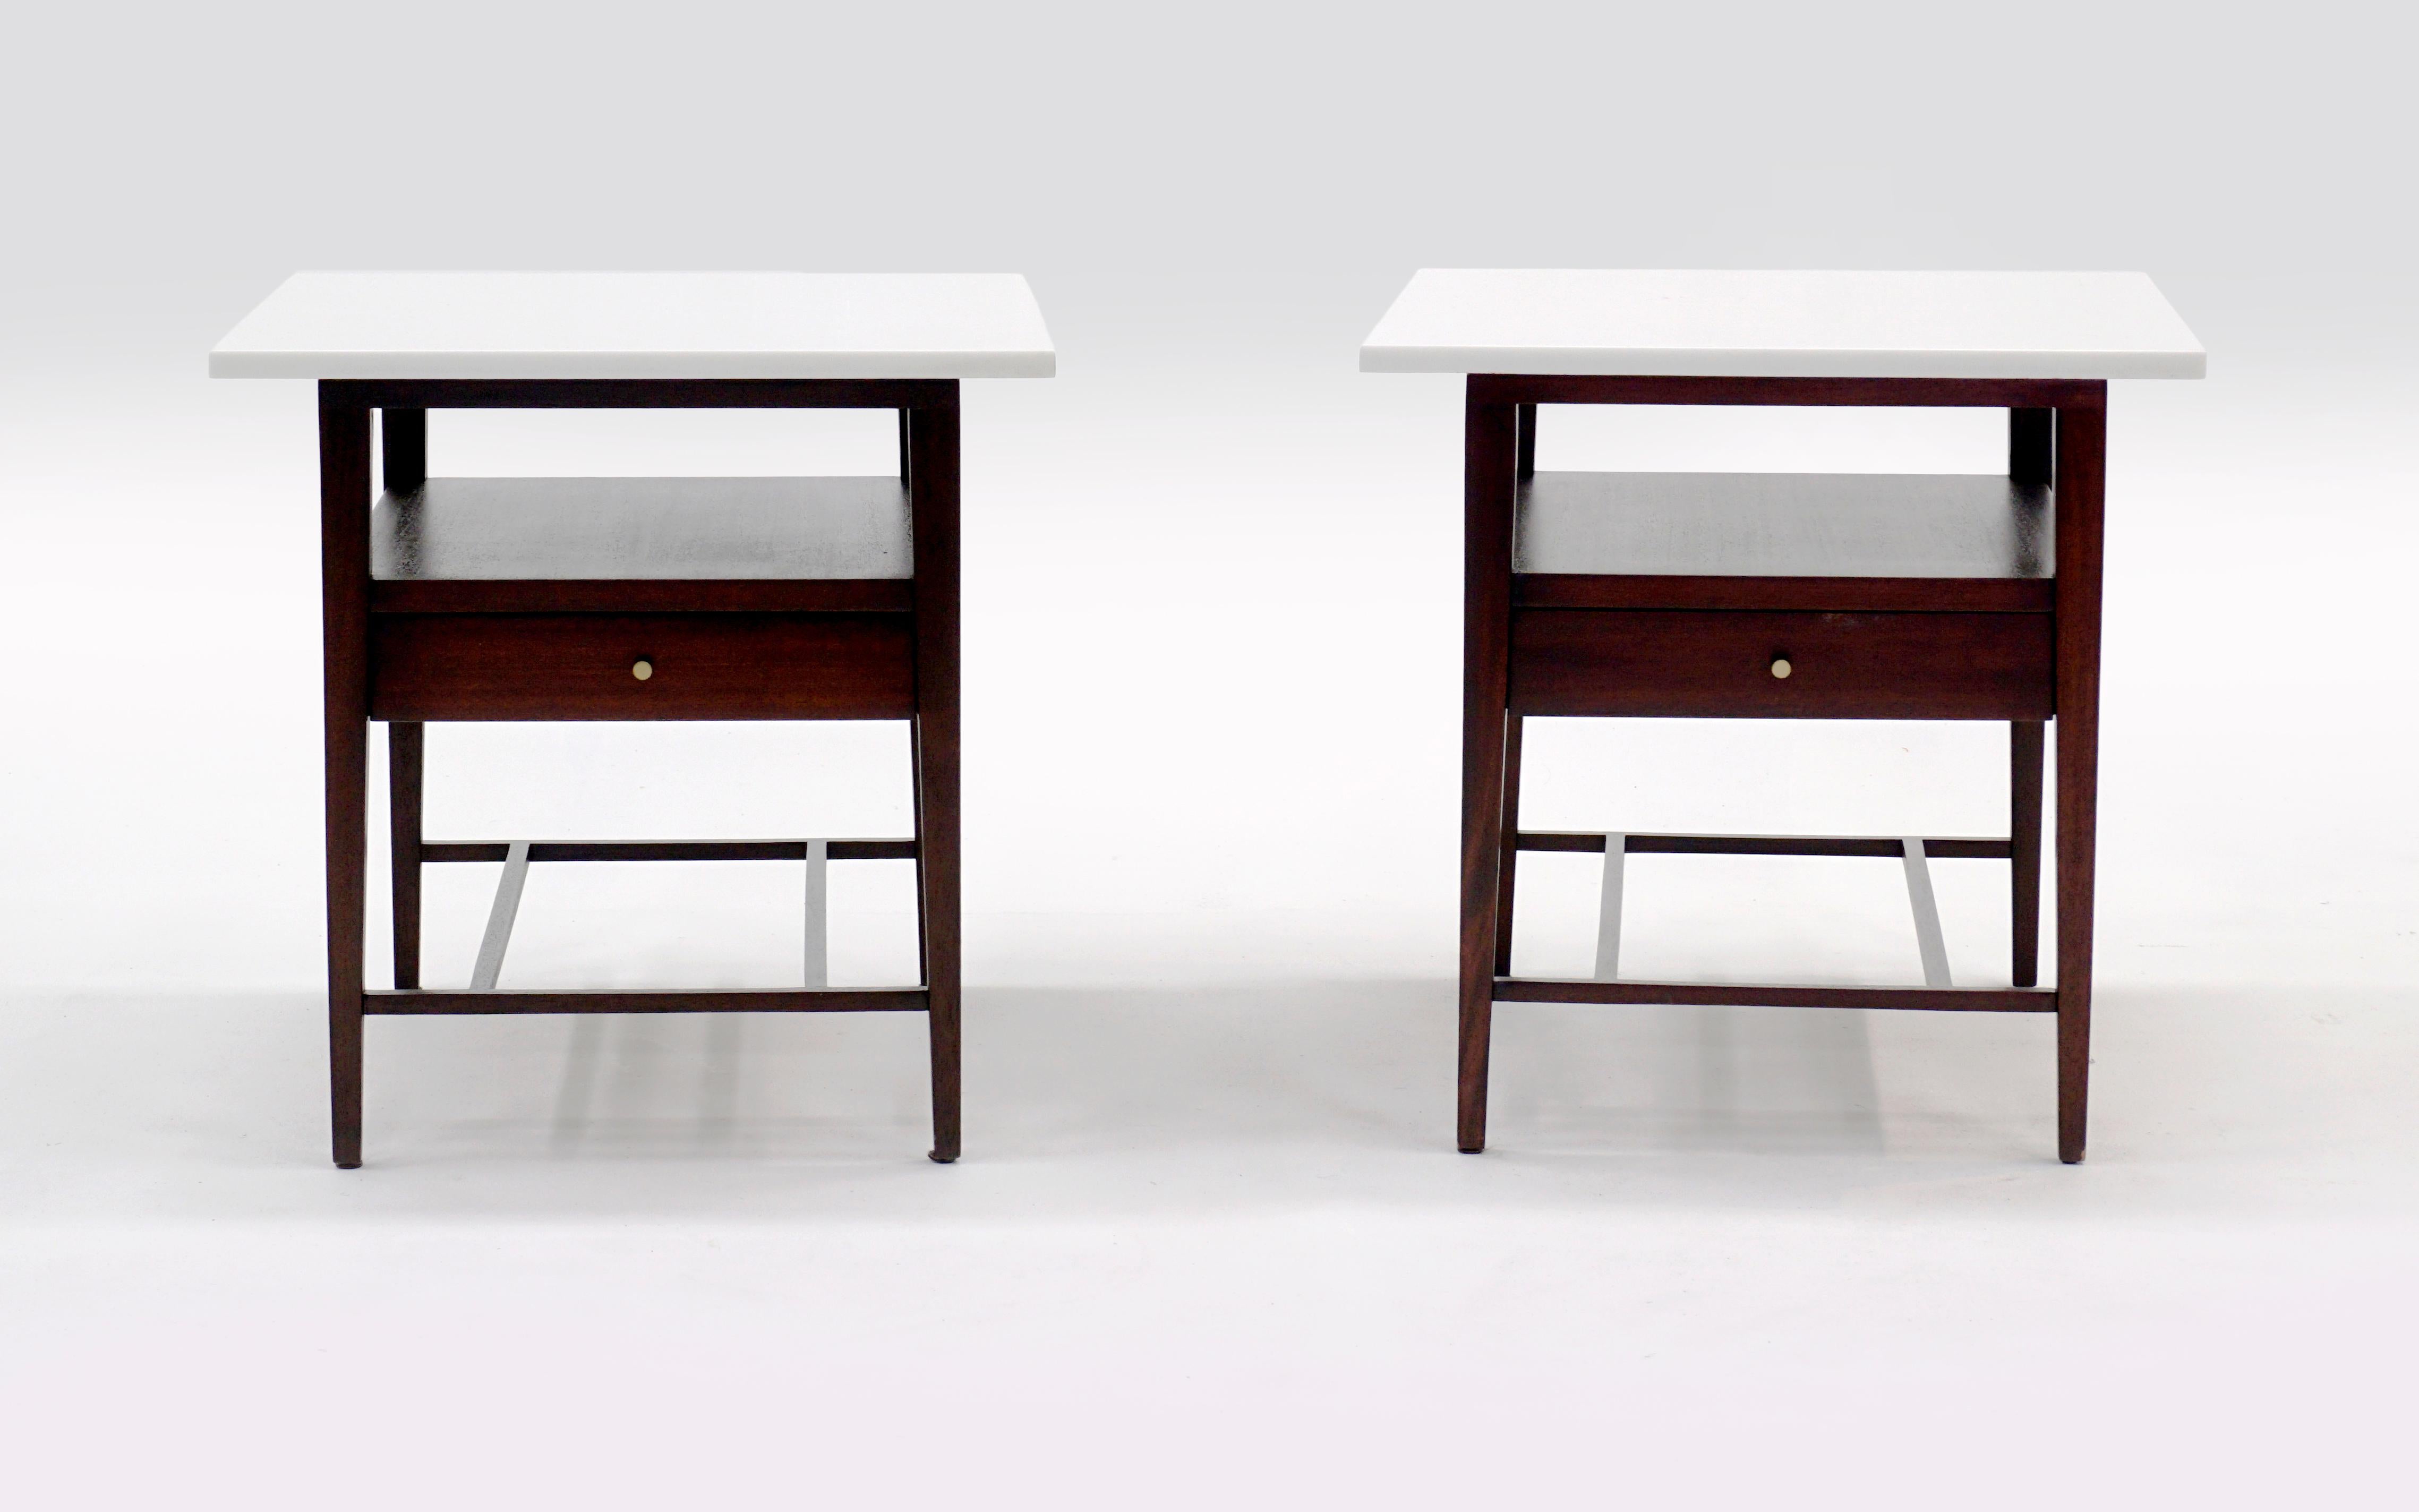 Pair of Paul McCobb nightstands / end tables with a single drawer, shelf, original brass pulls, and white Vitrolite tops. Both are in very good condition and were recently professionally refinished. These are part of McCobb's Irwin Collection for